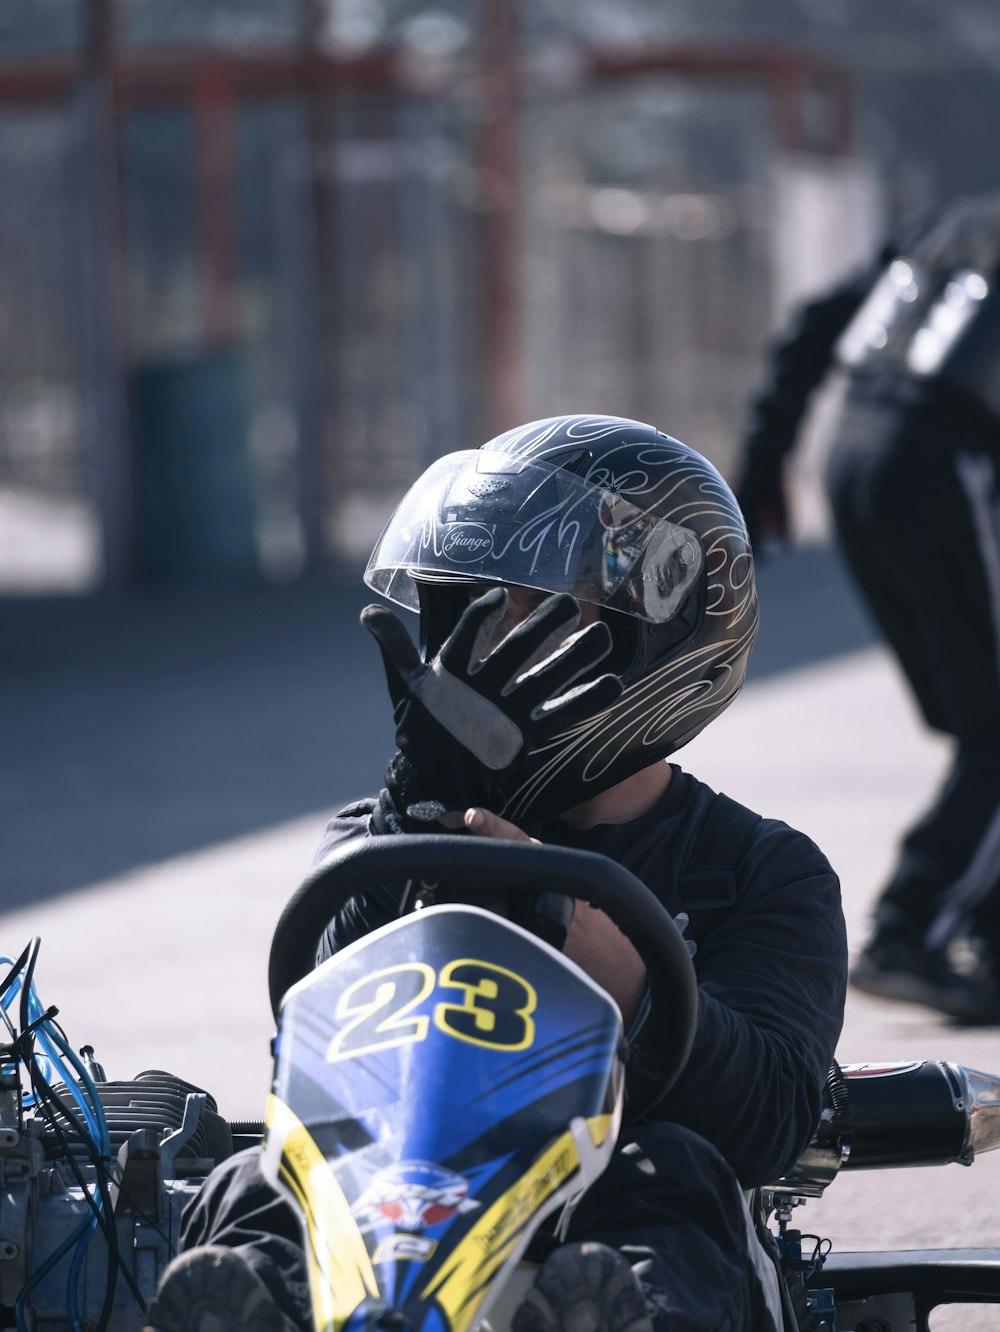 a person wearing a helmet and riding a motorcycle